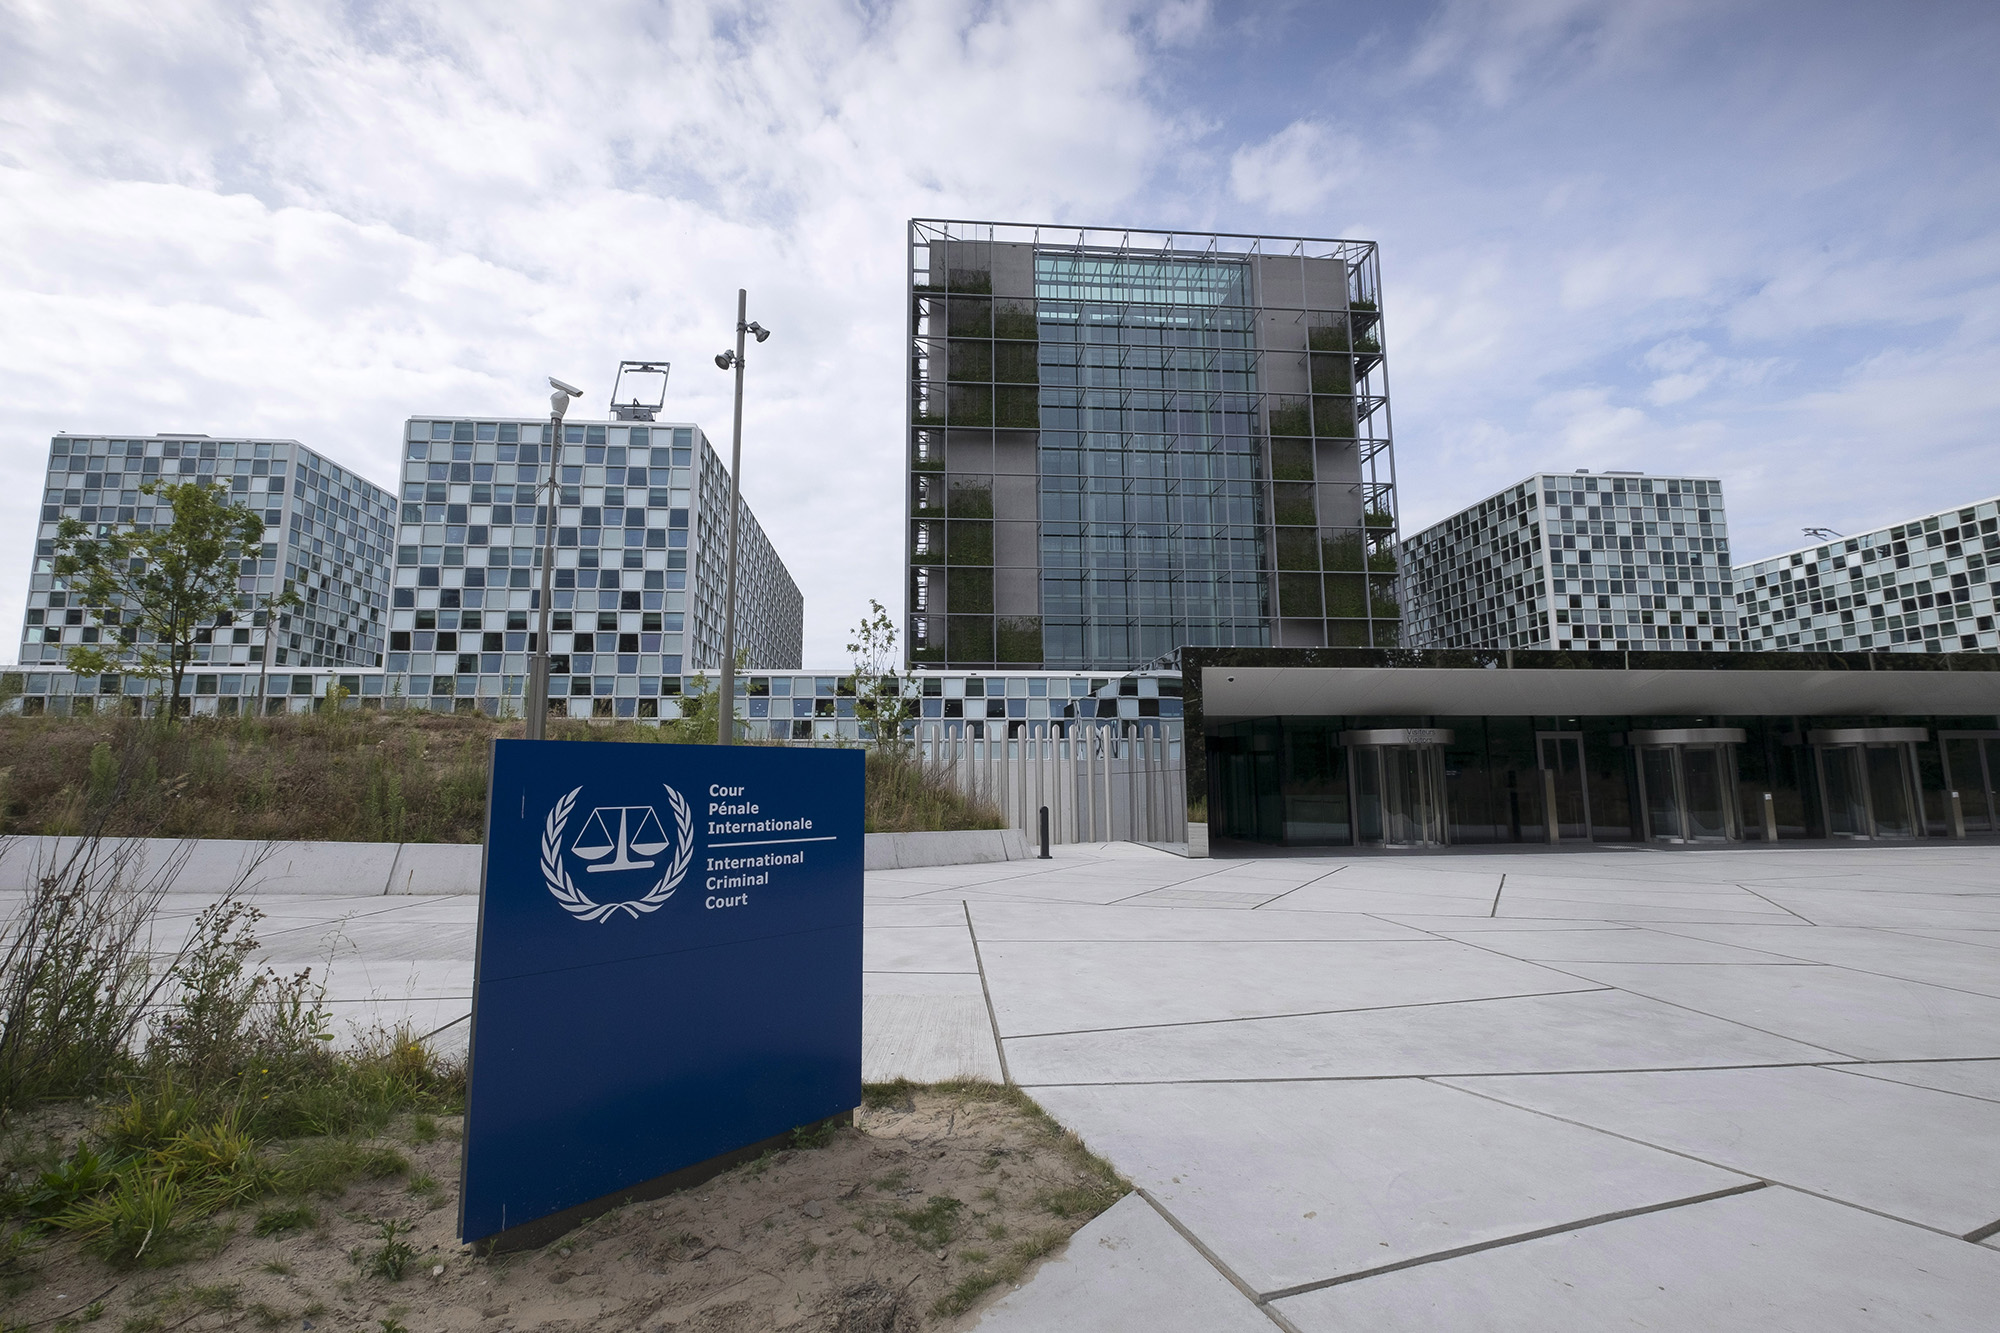 The International Criminal Court building in The Hague, Netherlands, July 30, 2016.